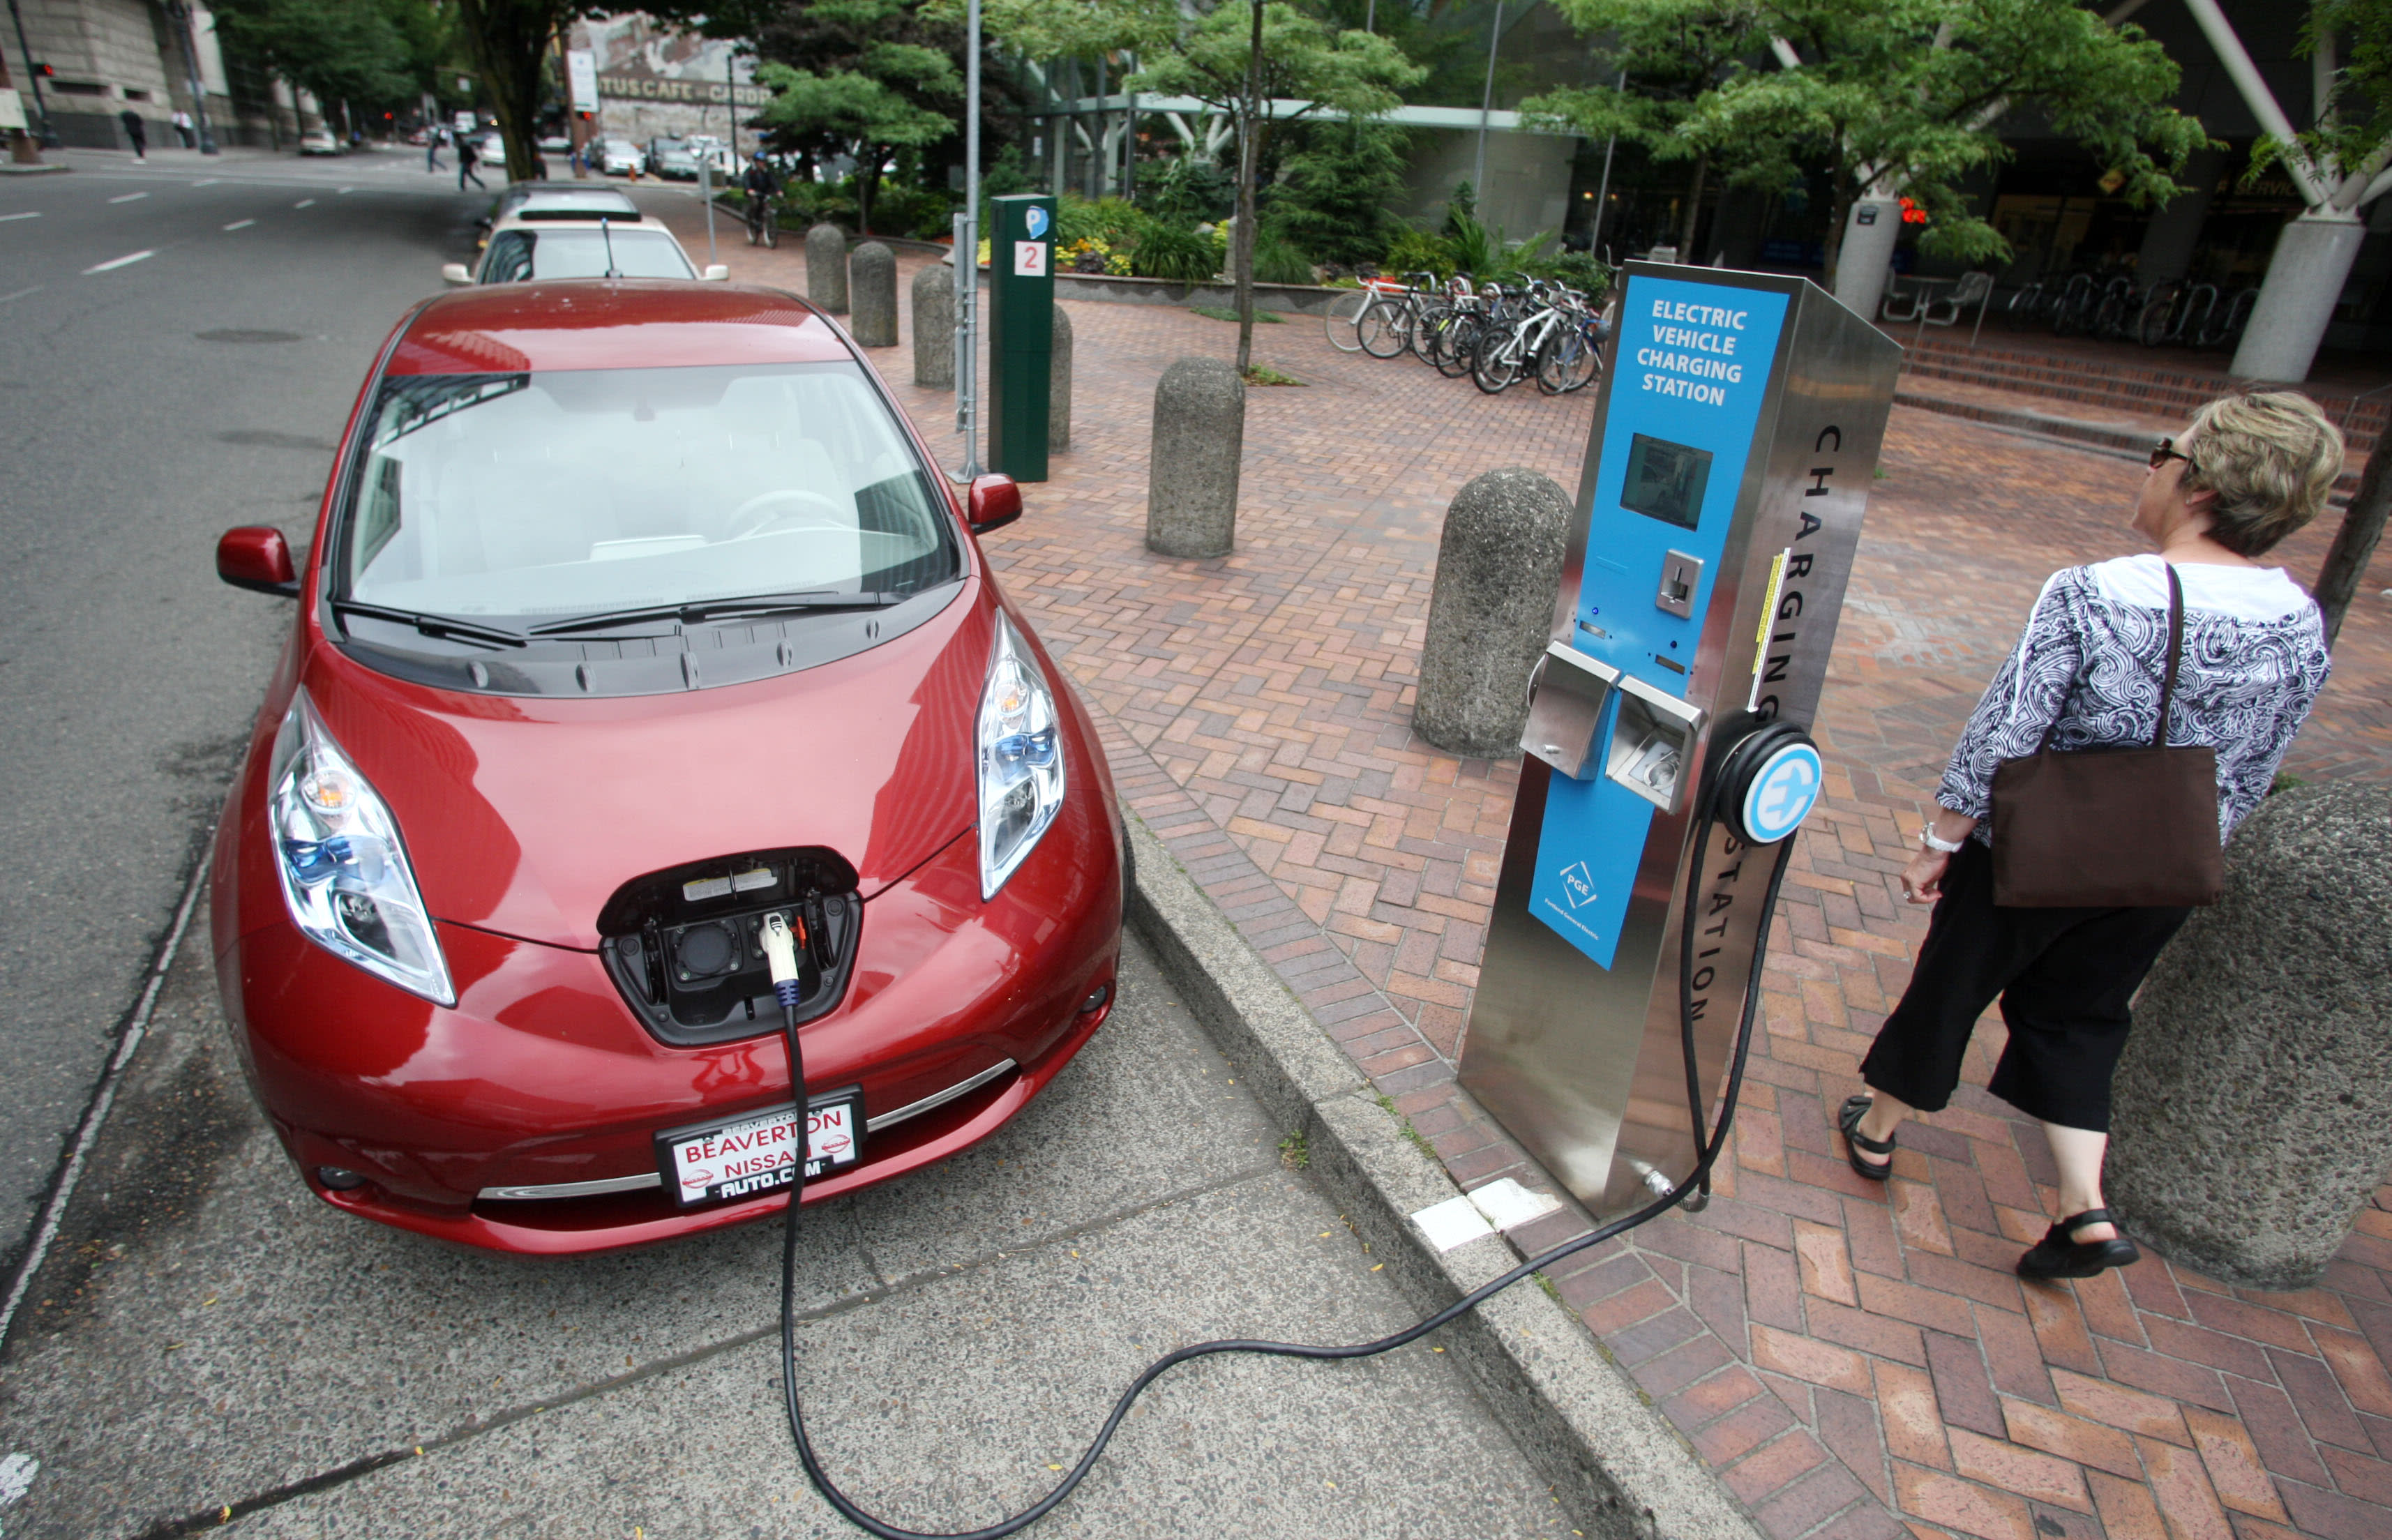 Leases for plugin electric cars may offer savings